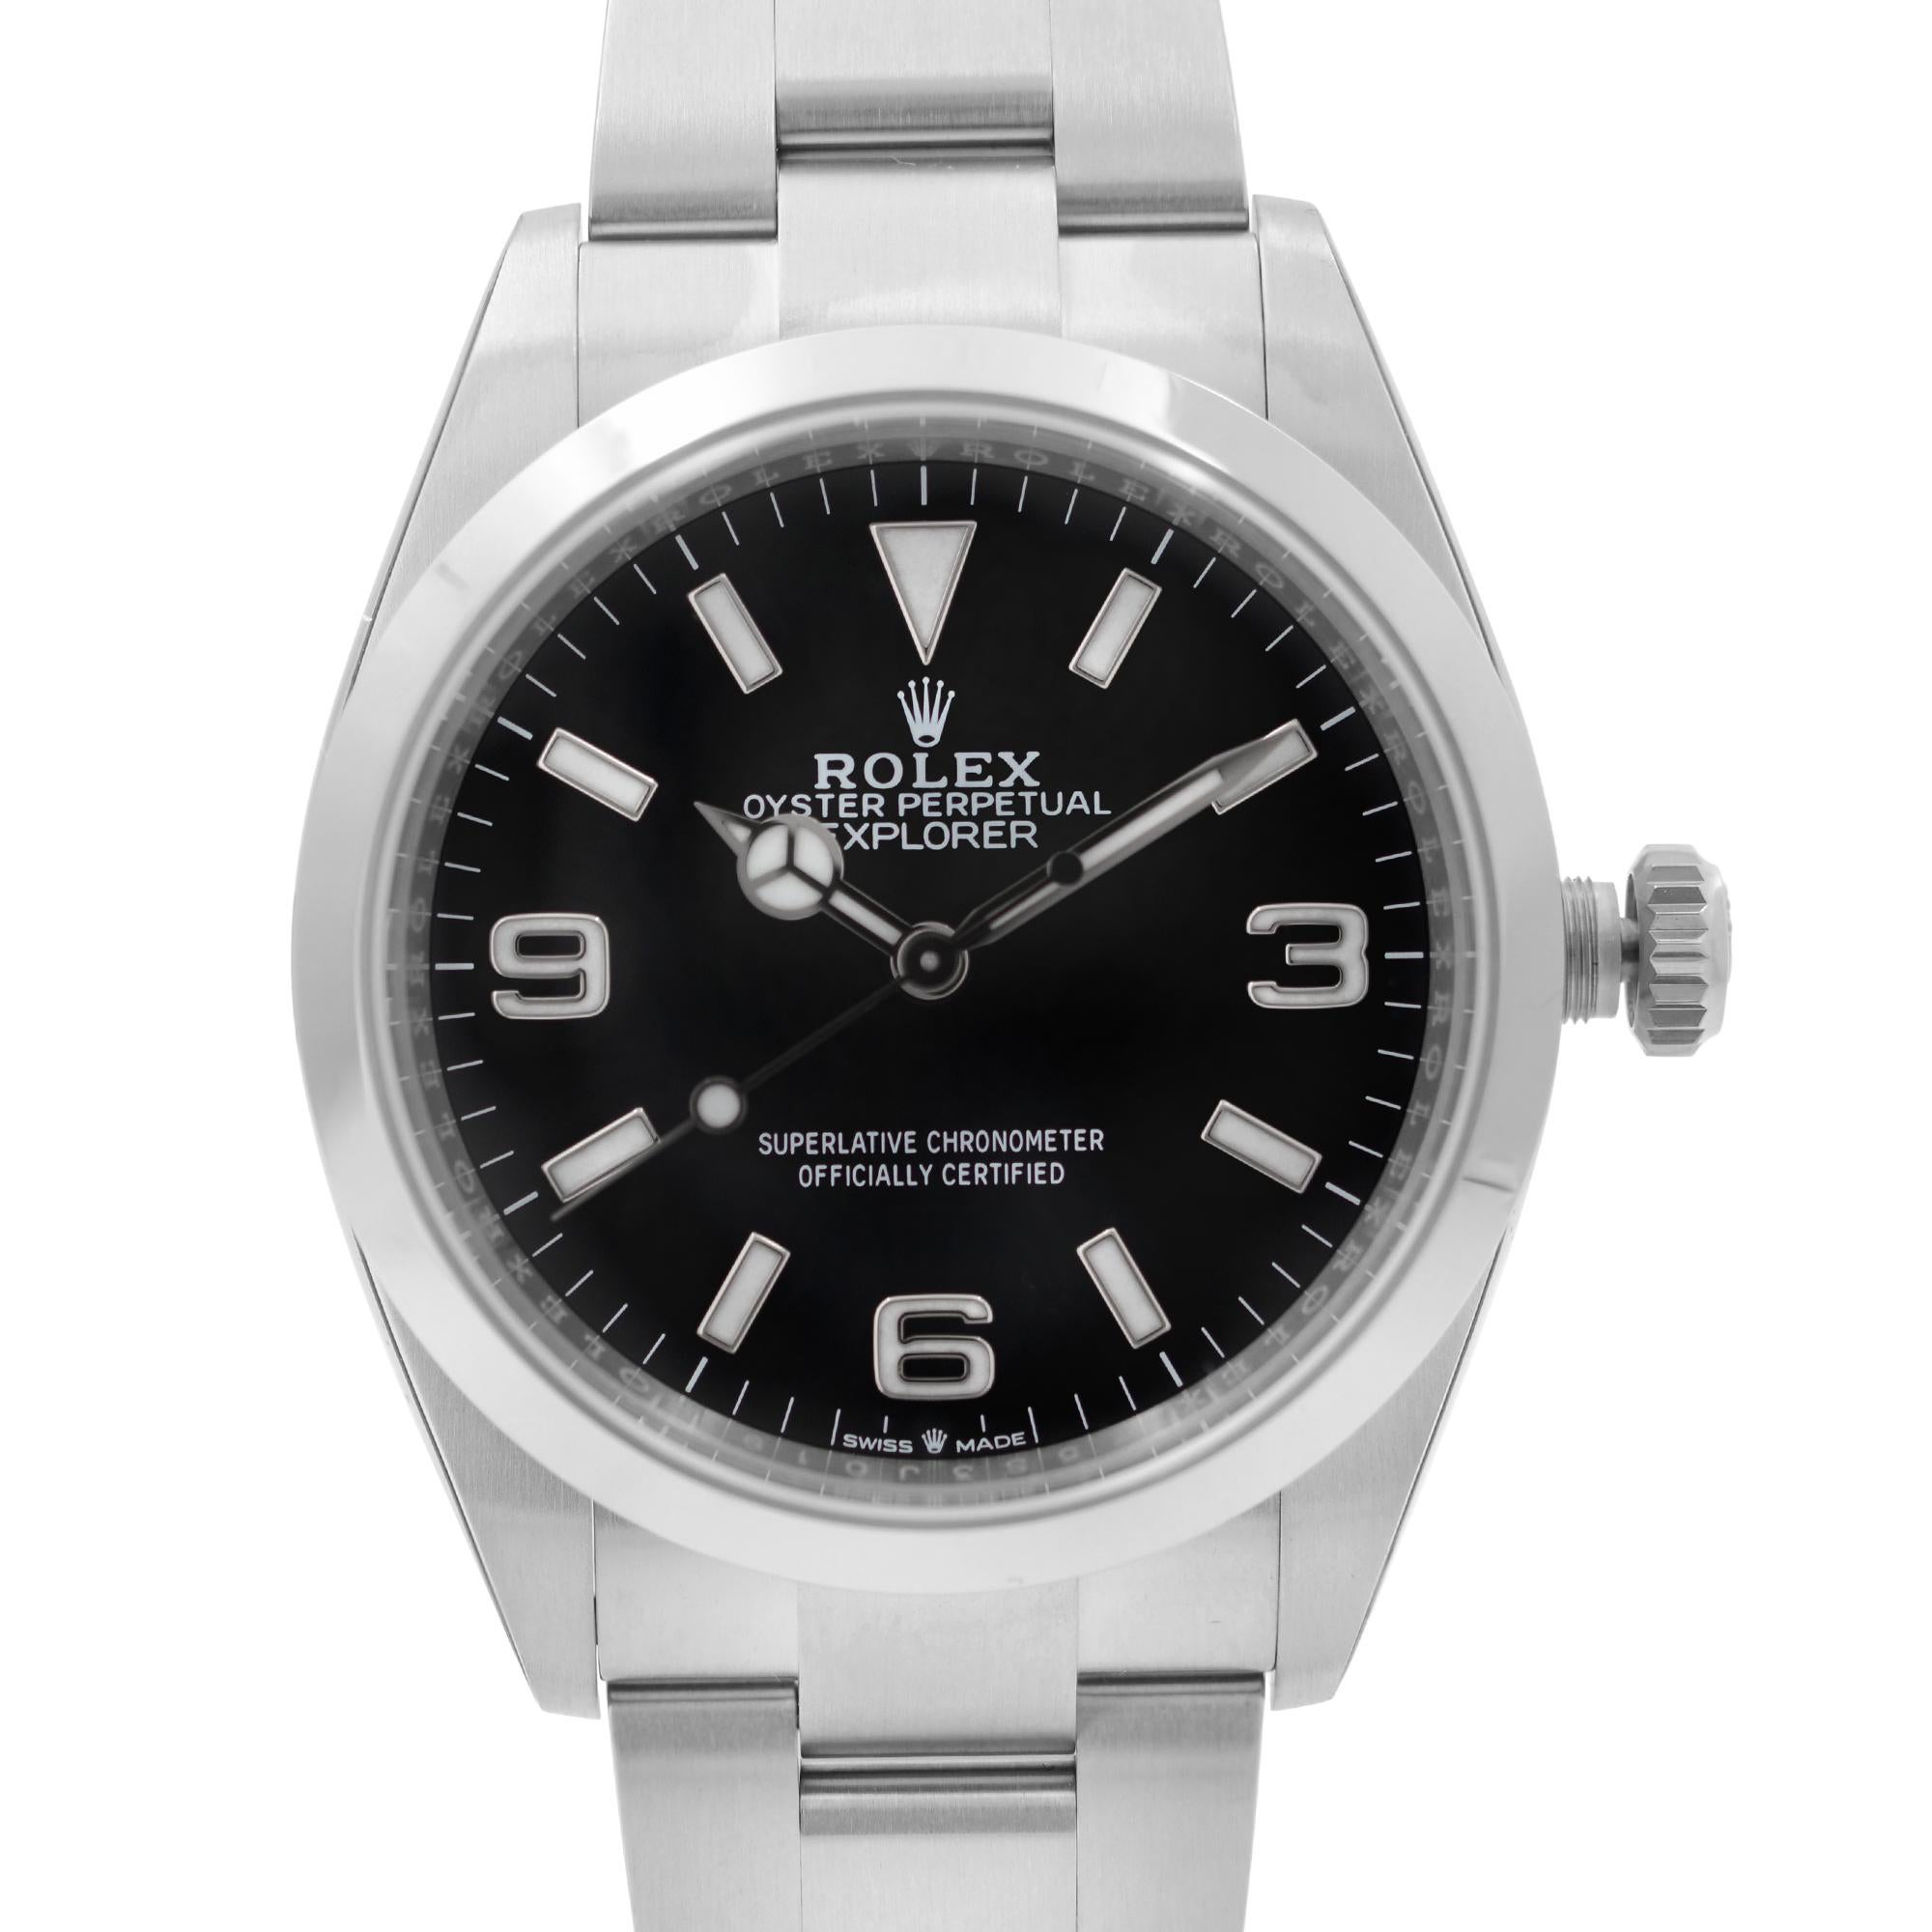 Brand New Fully Sticker 2021 Card. Rolex Explorer 36mm Stainless Steel Black Dial Automatic Men's Watch 124270. This Beautiful Timepiece Features: Stainless Steel Case with a Stainless Steel Oyster Bracelet. Fixed Smooth Stainless Steel Bezel, Black